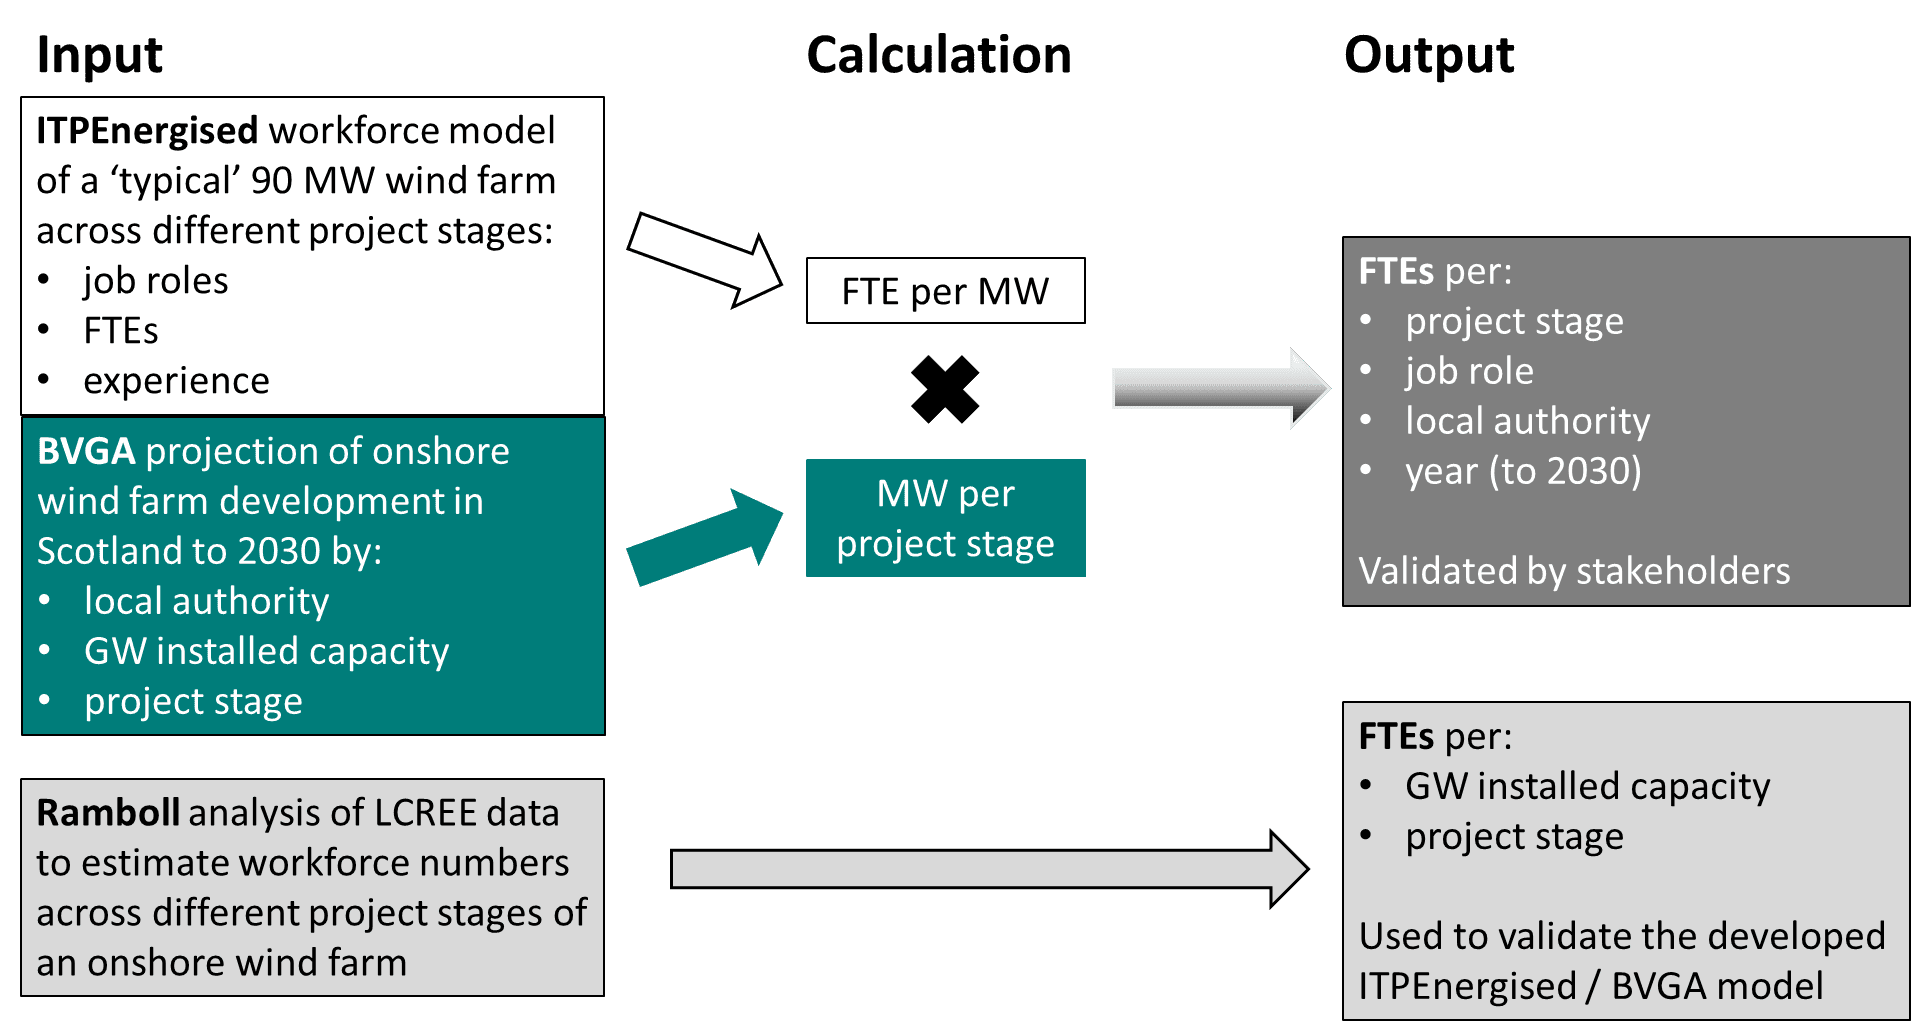 The image shows the structure of the onshore wind model. Inputs from ITPEnergised, BVGA and LCREEE are used to derive the number of jobs per MW, the number of MW per project stage and, as a result, the nuber 